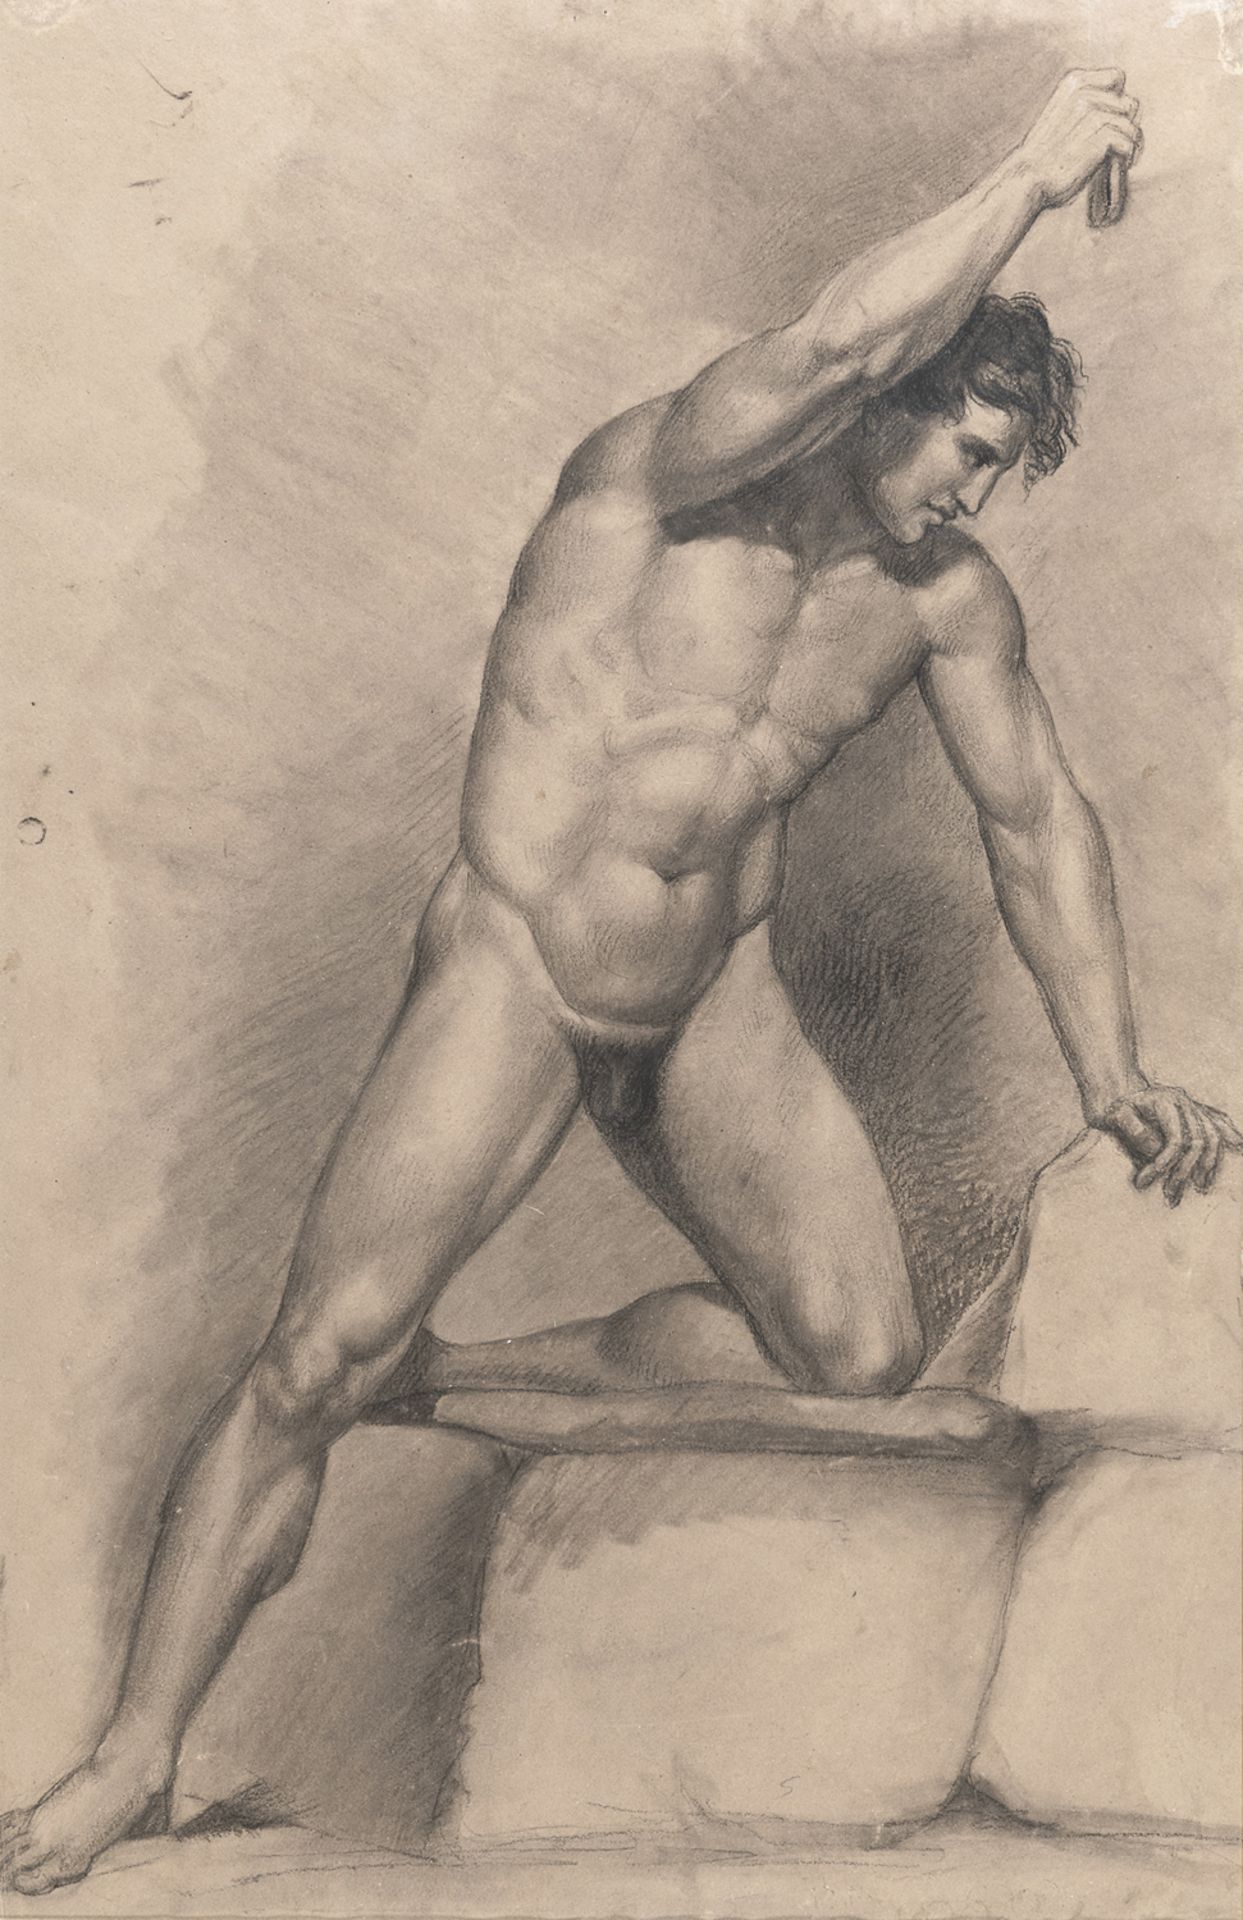 PENCIL DRAWING EARLY 20TH CENTURY